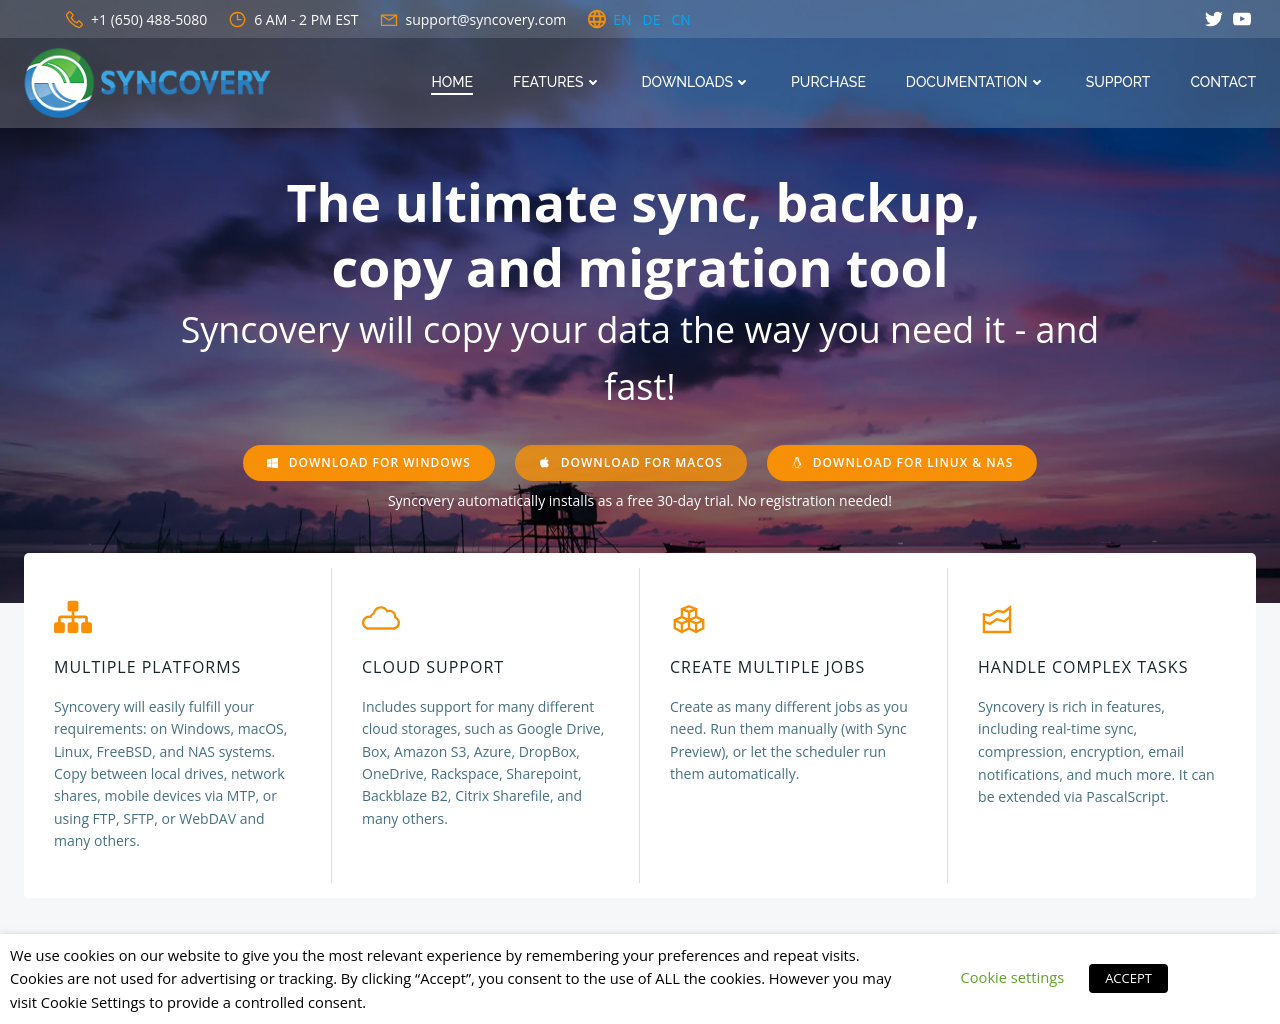 syncovery.com